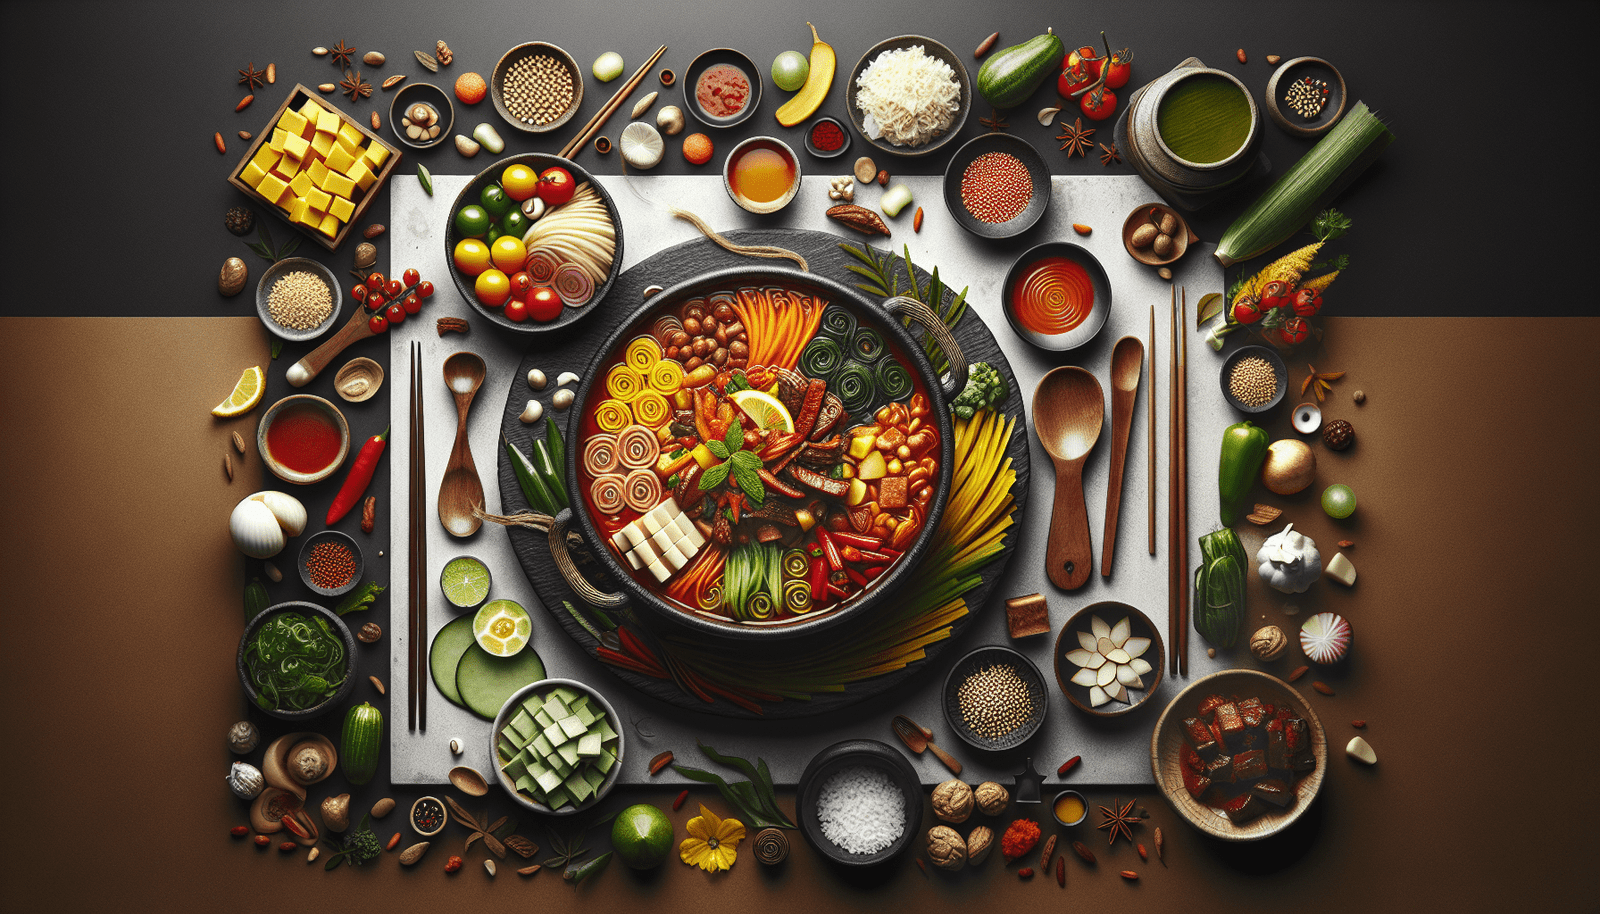 Can You Share Insights Into The Rise Of Modern Takes On Traditional Korean Stews?